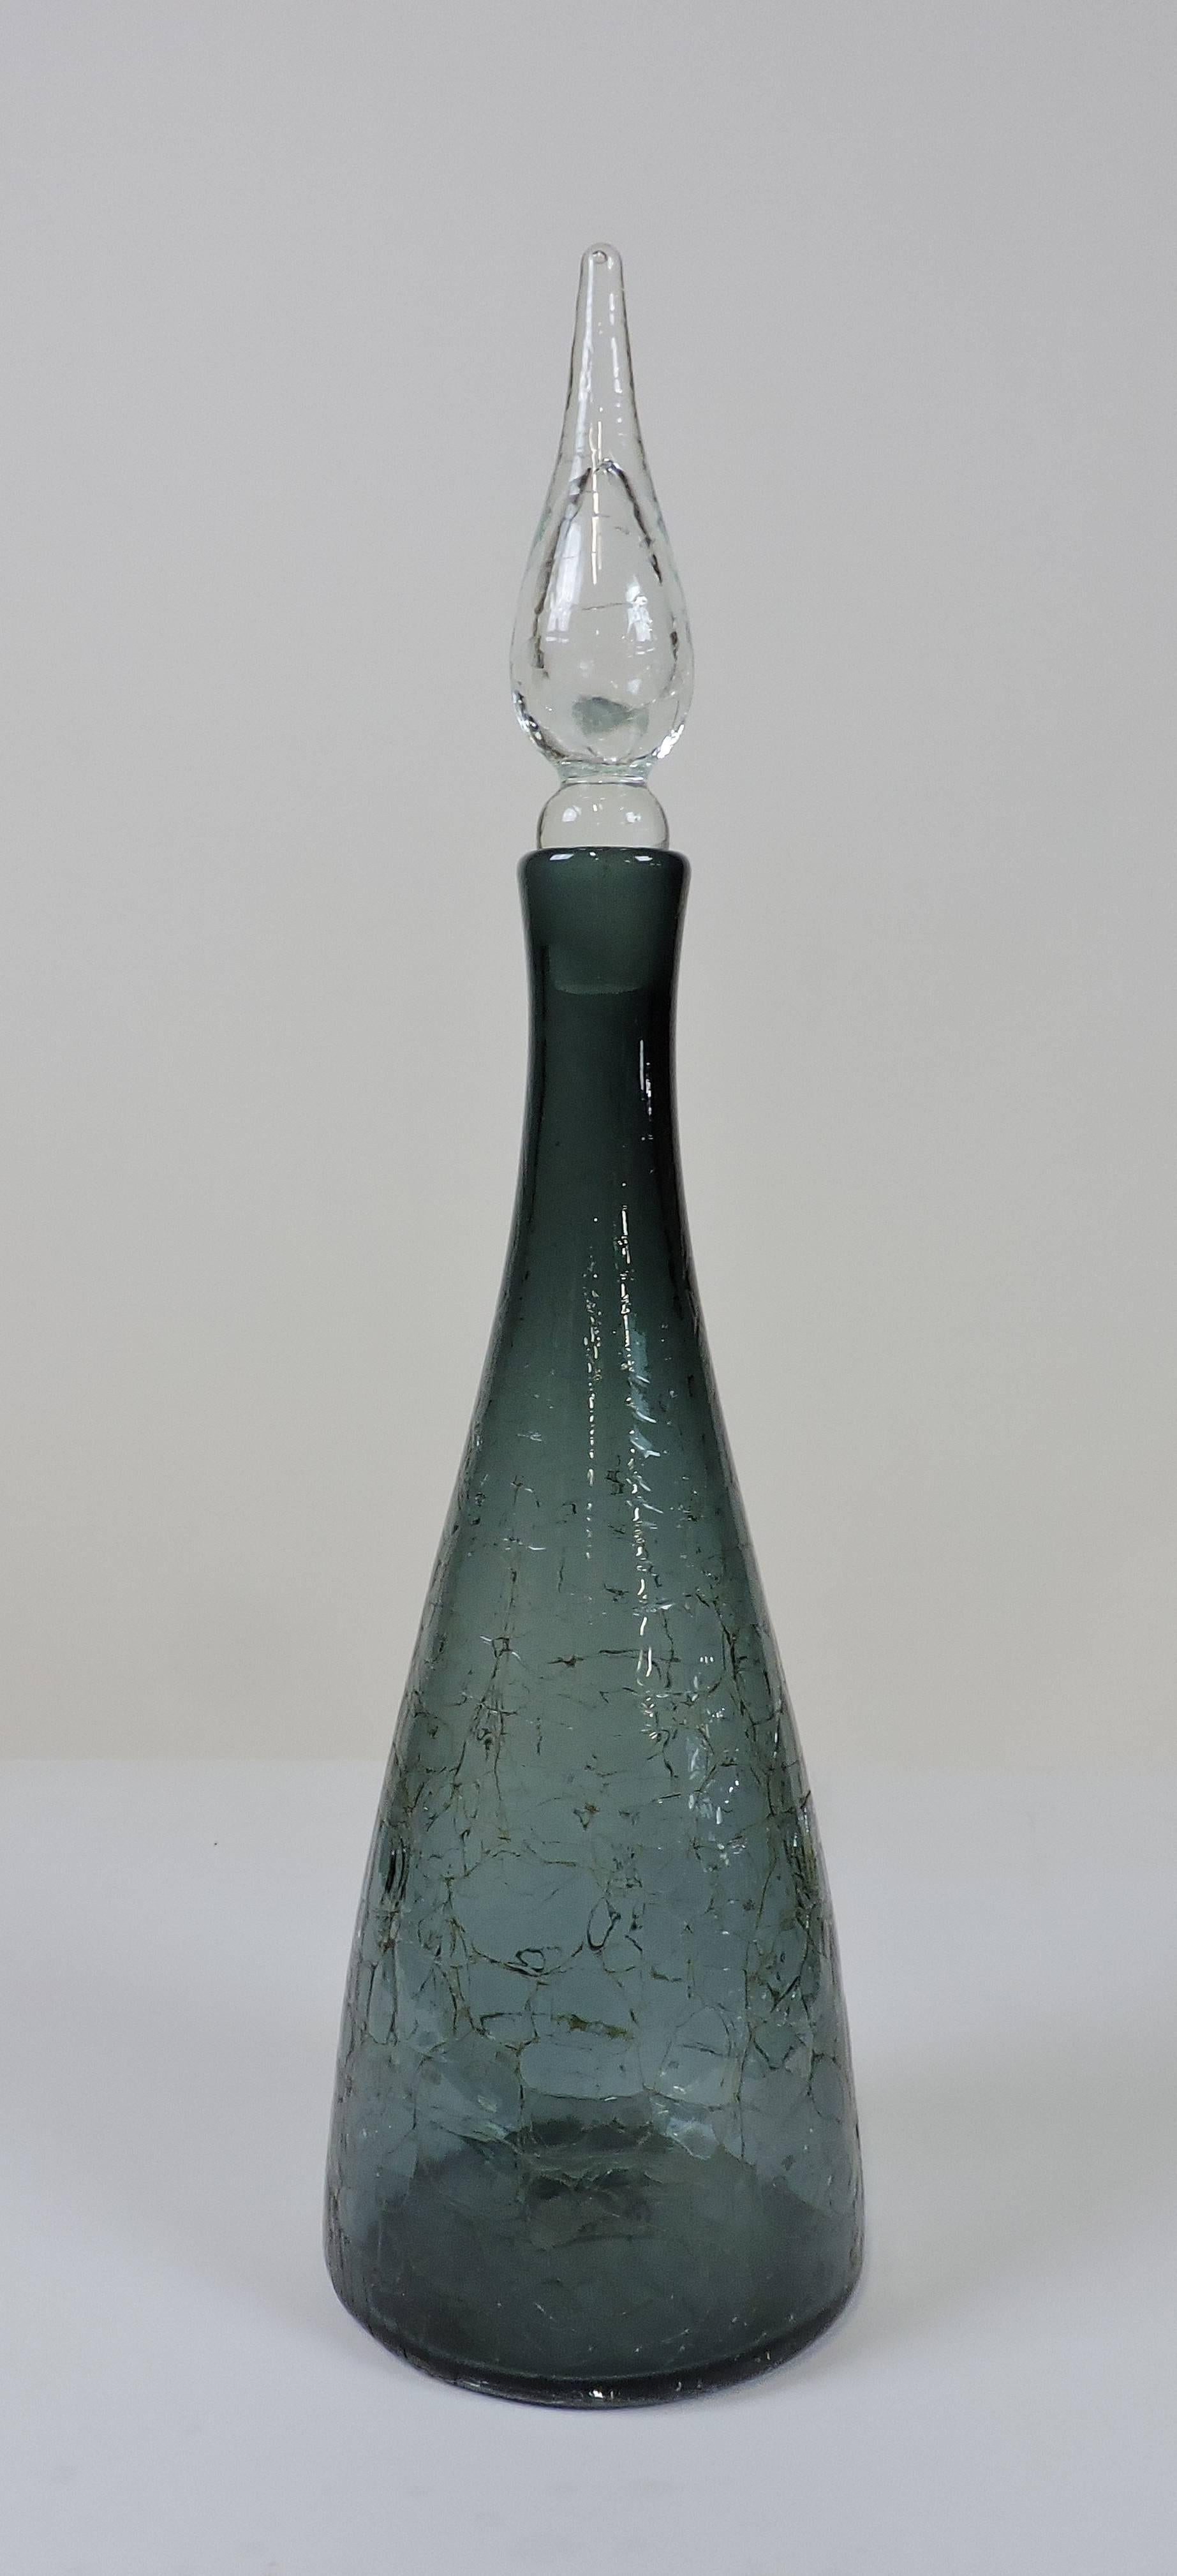 American Mid-Century Modern Blenko Crackle Glass #920 Decanter in Charcoal